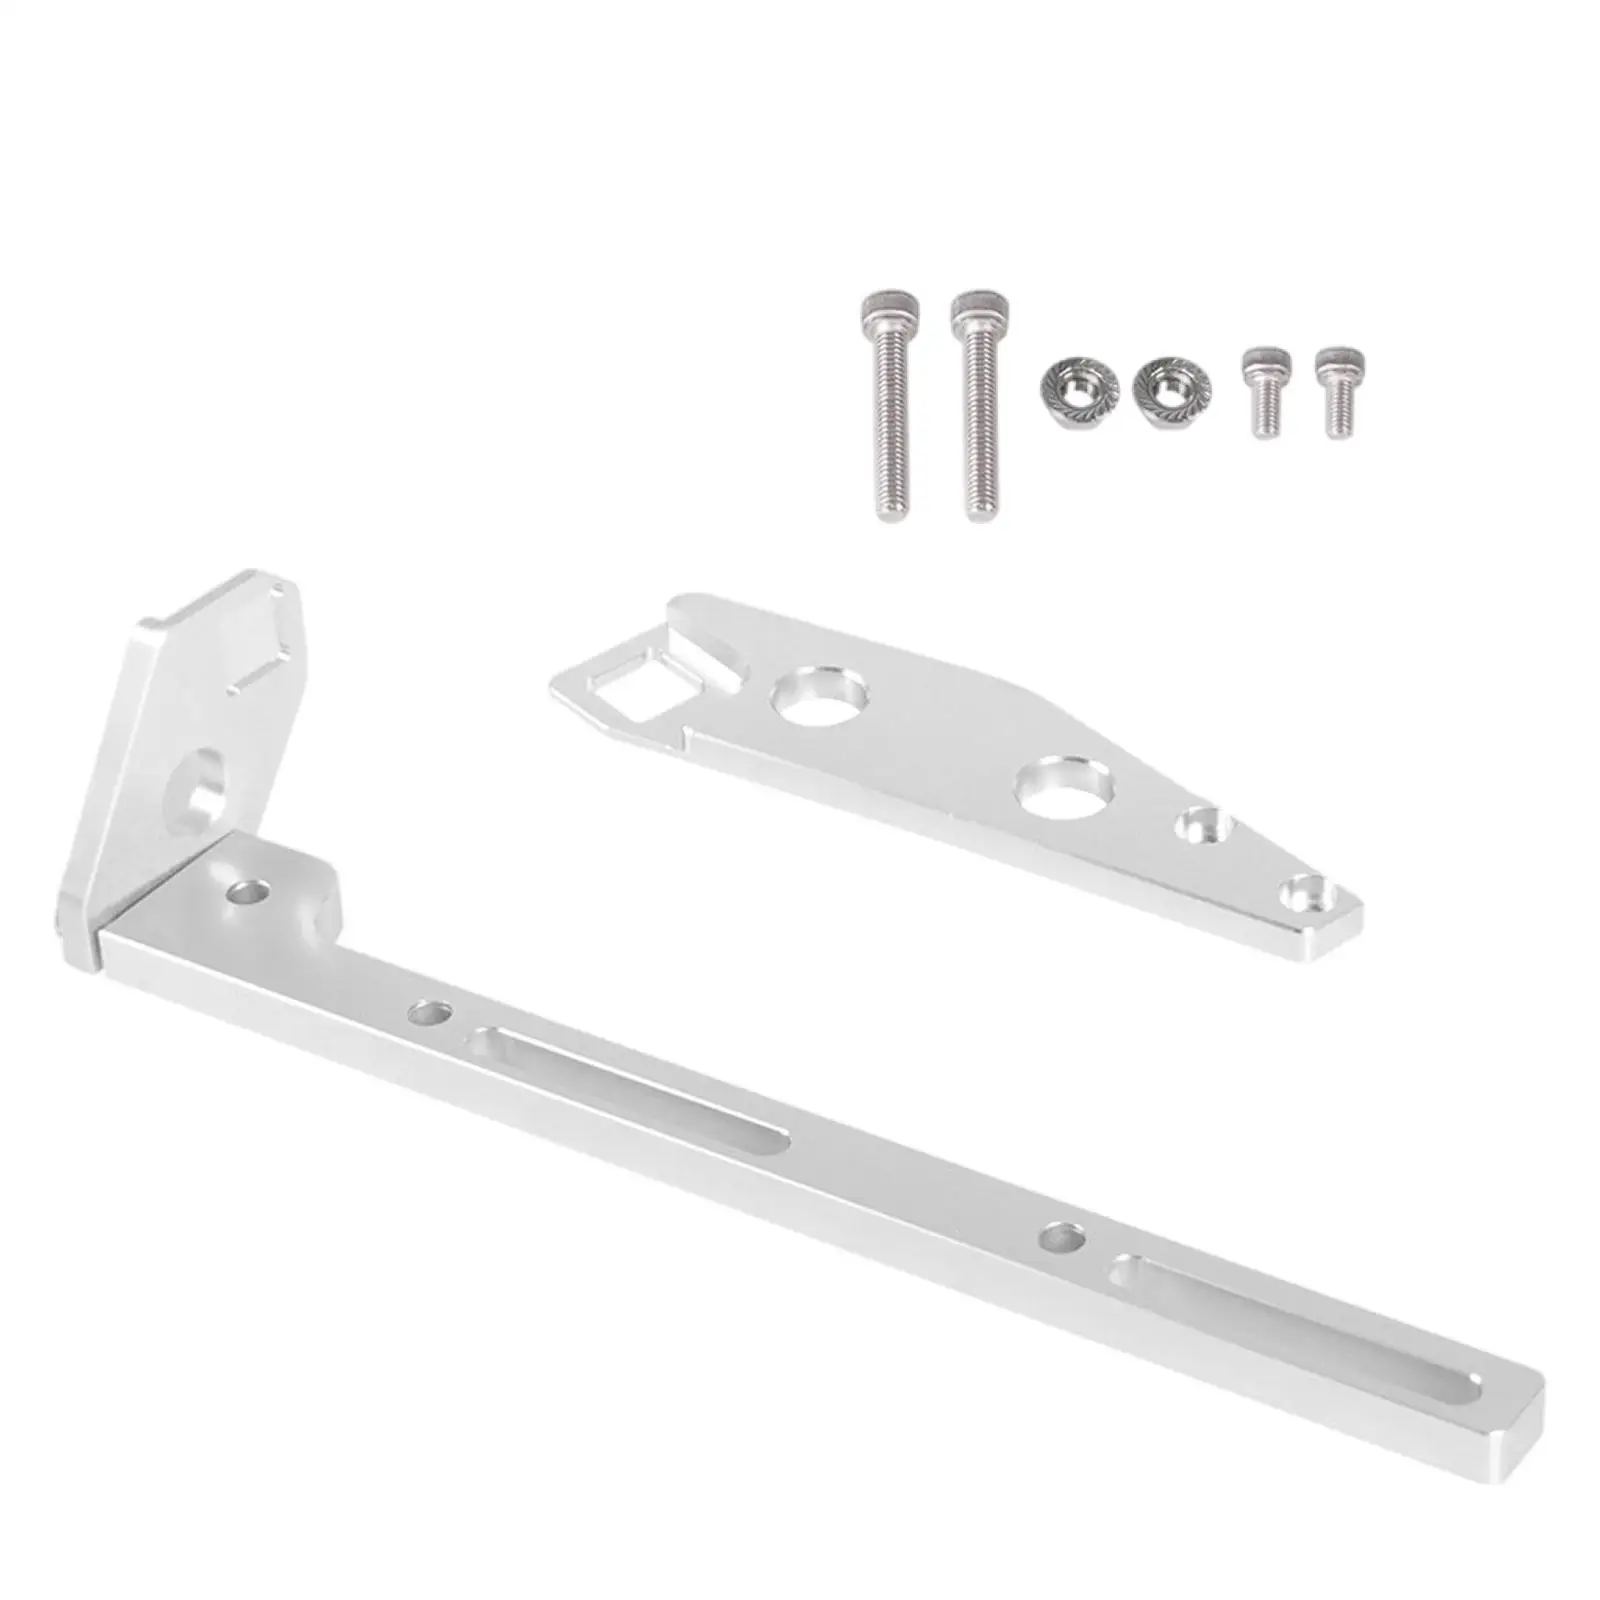 Throttle Cable Bracket Aluminum Alloy Silver Adjustable Universal 102mm Fit for 870017 870016 832142 820031